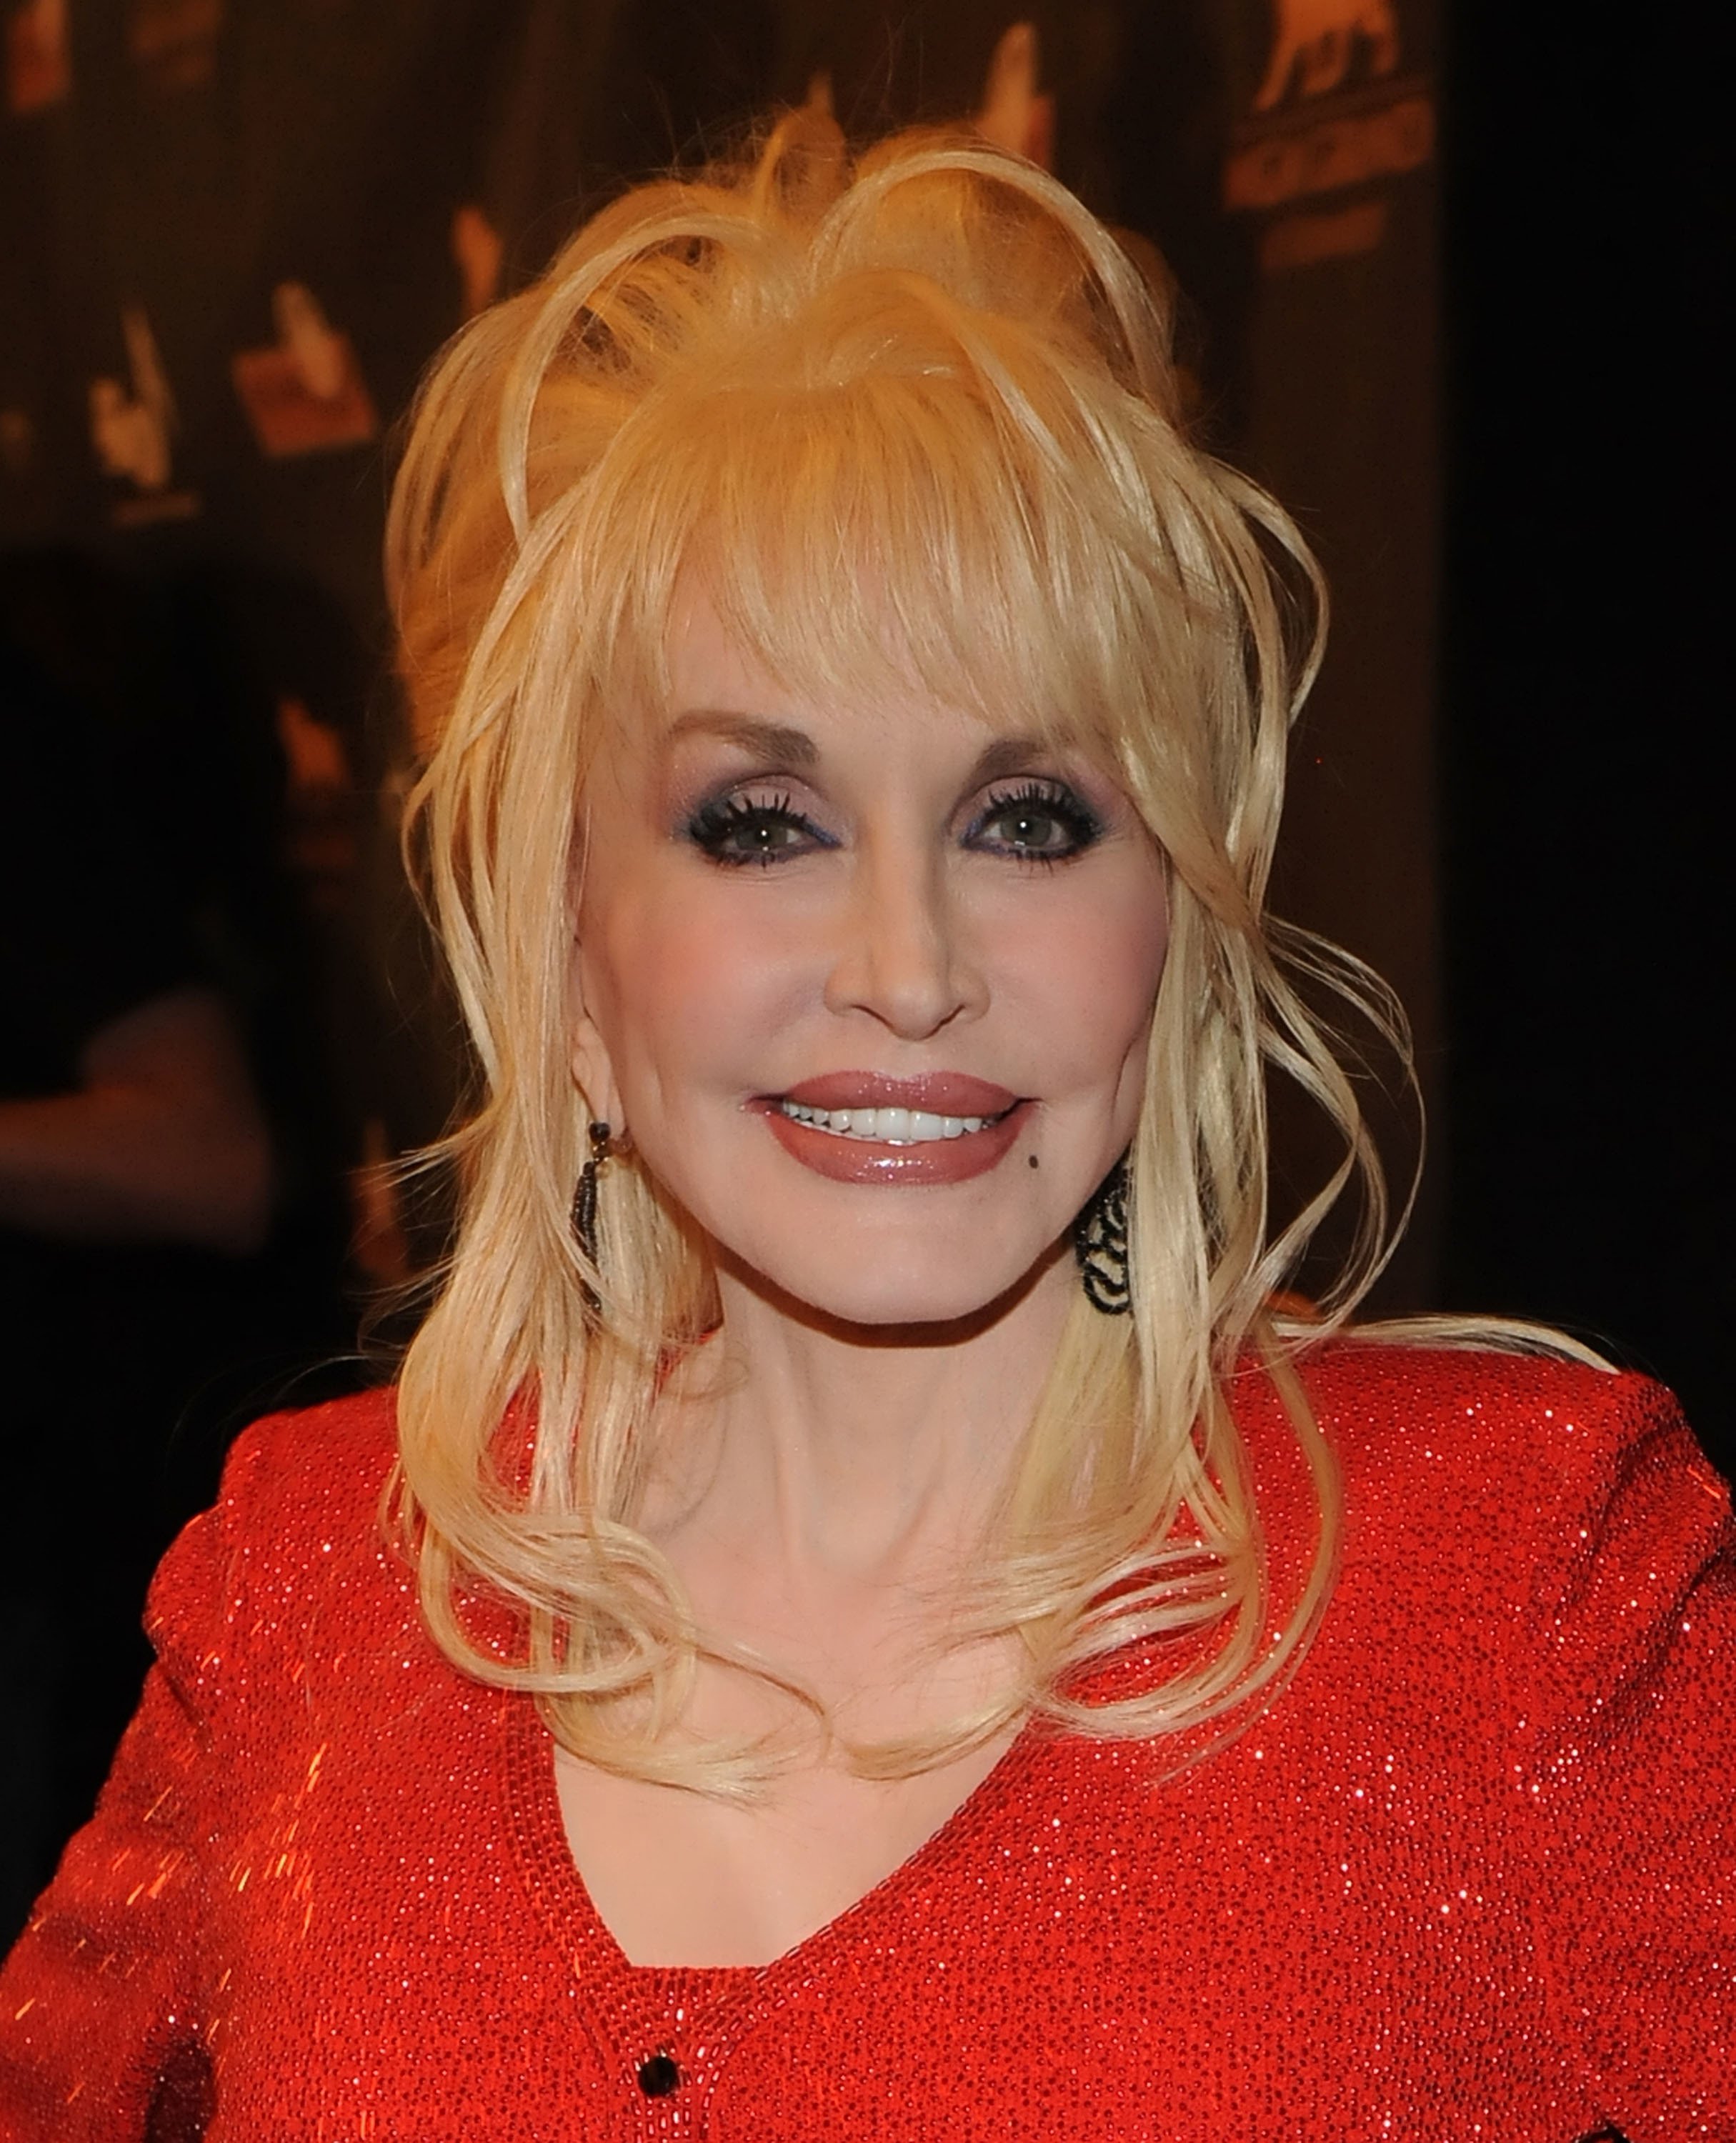 Singer/Songwriter Dolly Parton attends the Kenny Rogers: The First 50 Years award show at the MGM Grand at Foxwoods on April 10, 2010 | Photo: Getty Images